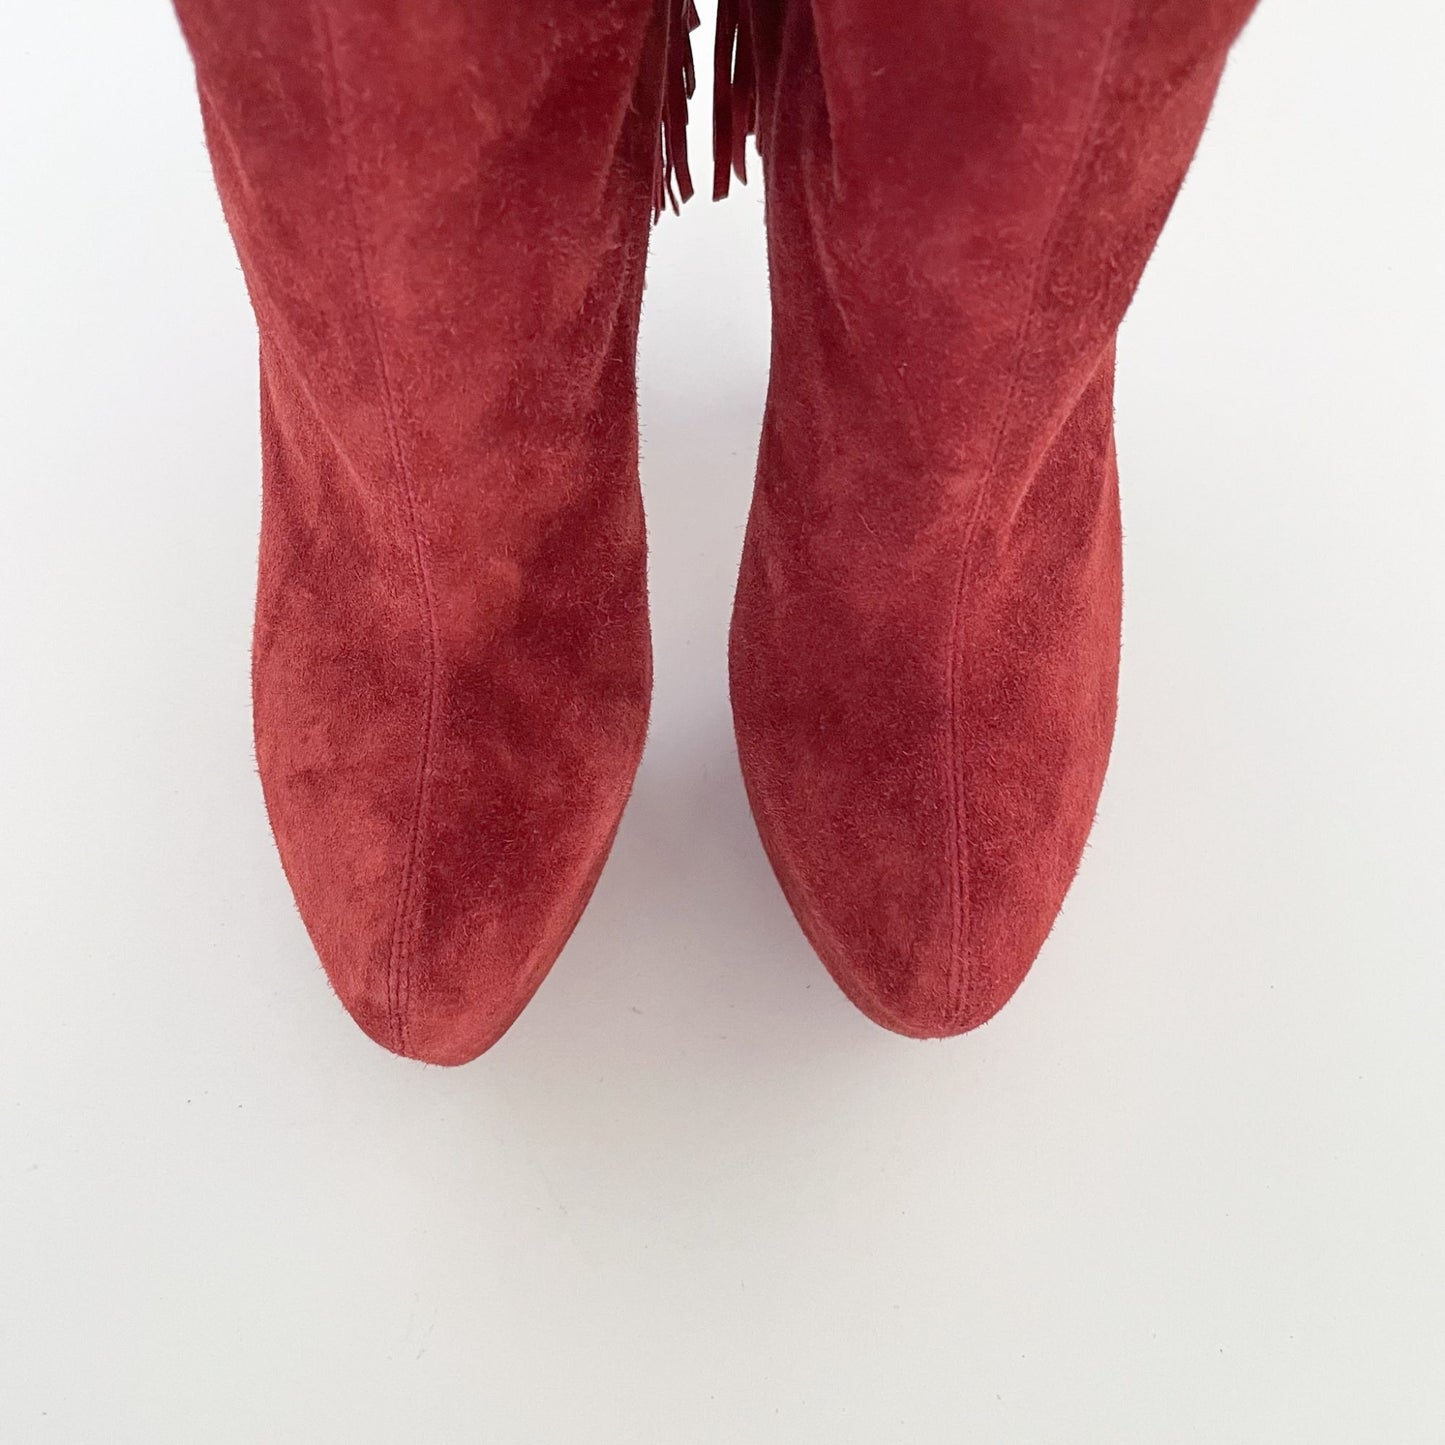 Christian Louboutin Interlopa 160 Boots in Moroccan Red Suede Size 39